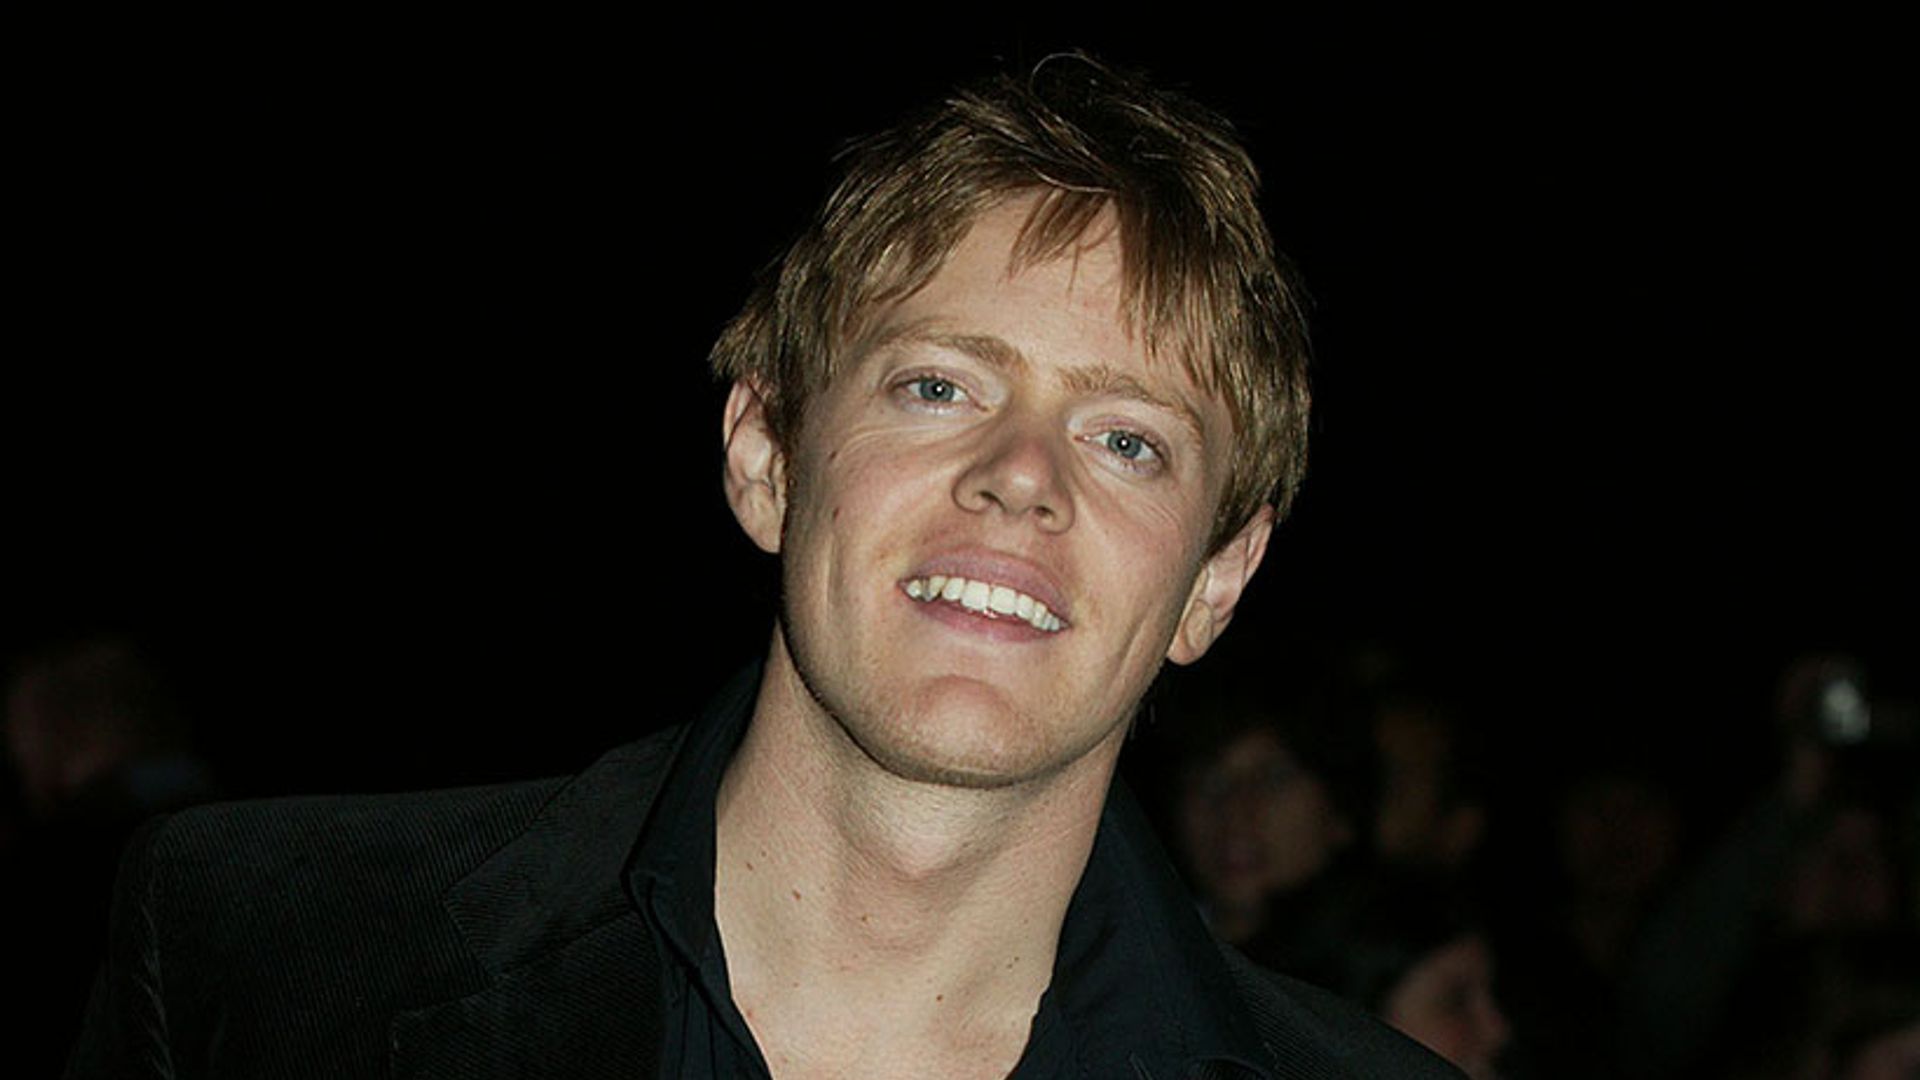 Find out Love Actually star Kris Marshall aka Colin Frissell's fate in the sequel